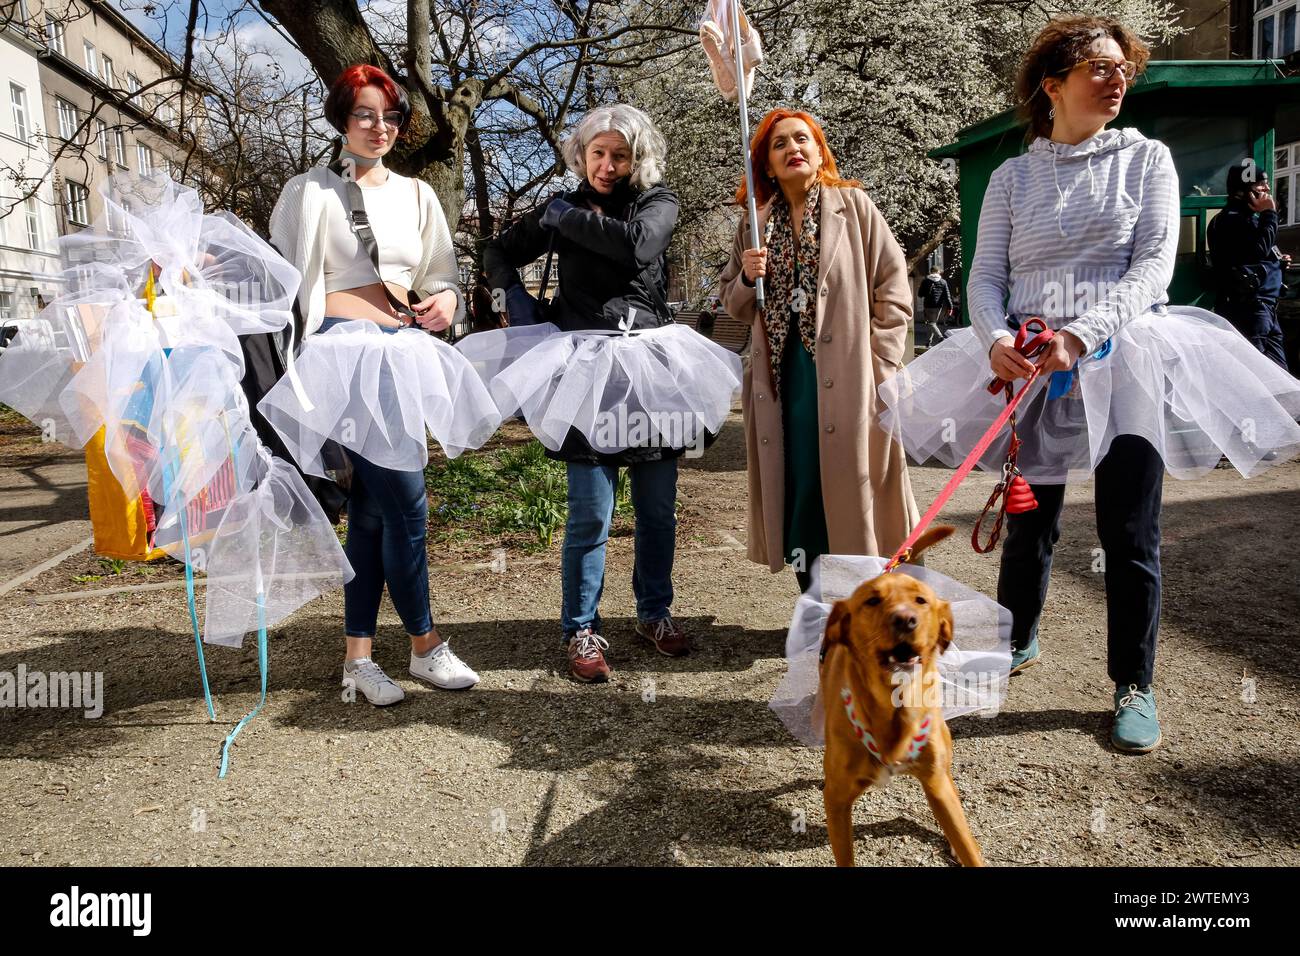 A group of protesters in ballerina white skirts, to symbolize purity and confinement protest in front of the Russian Consulate in Krakow during the third day of Russian Presidential Elections, Russian opposition leader, who recently died in jail, Alexei Navalny, and then his wife Julia Navalna, called opposition to come to the voting polls on the March 17 at noon, to show Russian President, Vladimir Putin the number of people opposing his reign. It is illegal and dangerous to protest against the government in Russia, that is why Julia Navalna suggested the idea of gathering at voting polls at Stock Photo